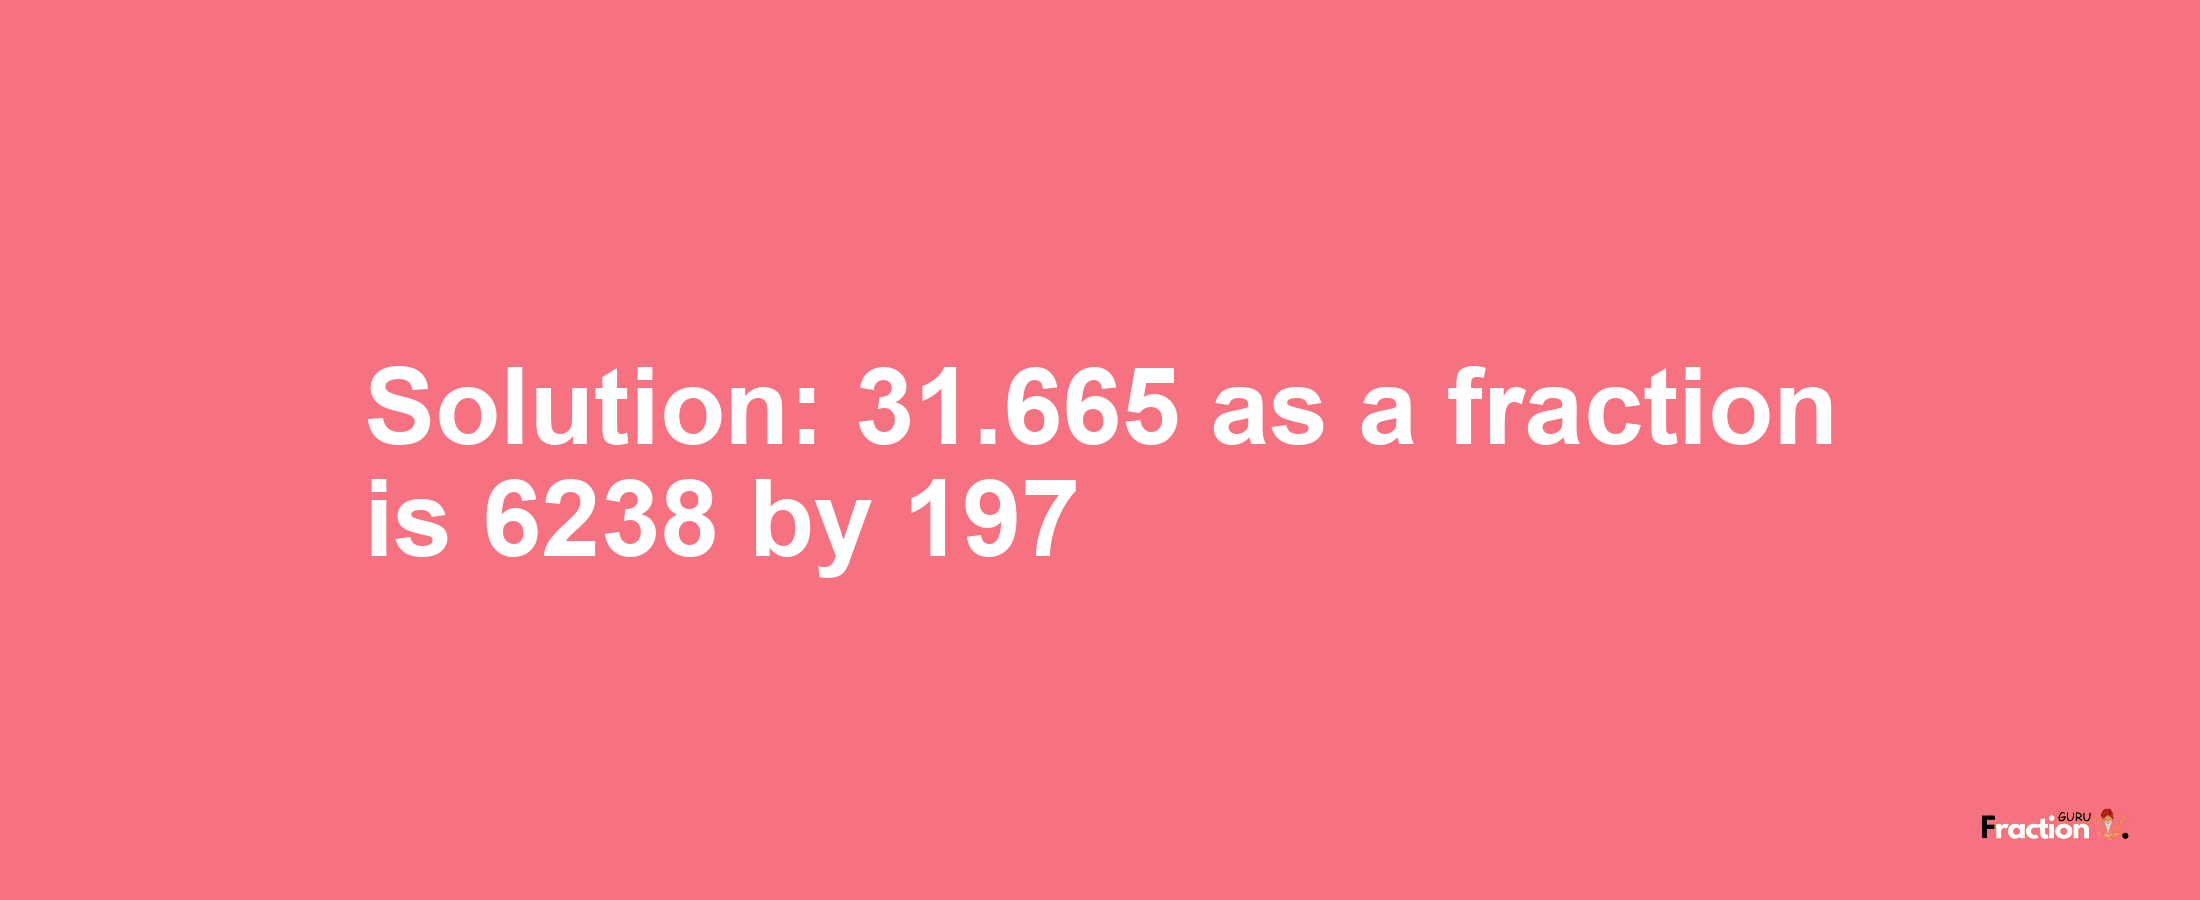 Solution:31.665 as a fraction is 6238/197